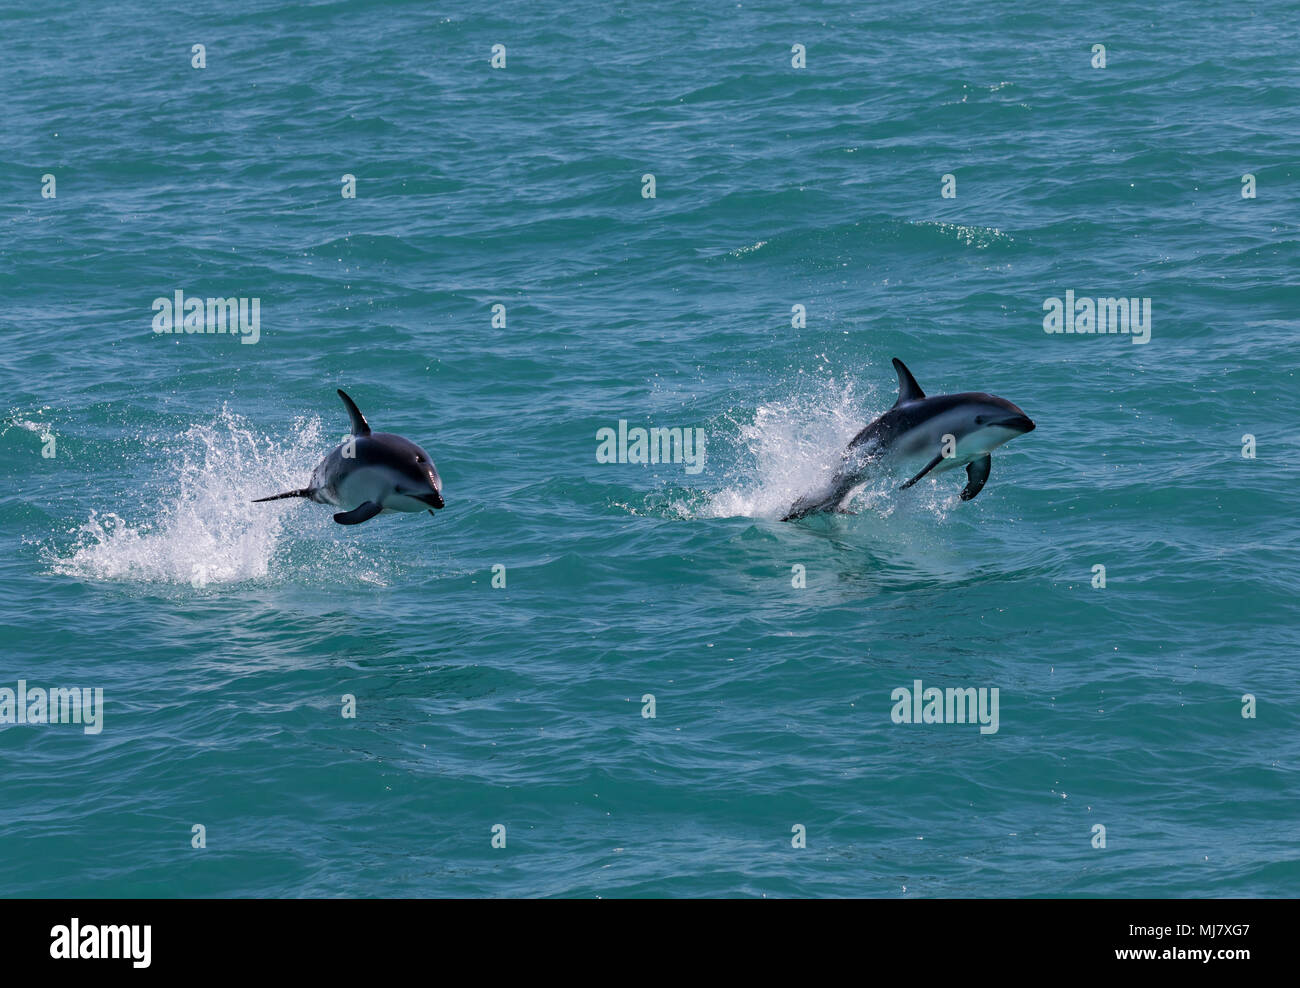 Two dusky dolphins (Lagenorhynchus obscurus) jumping out of the water near Kaikoura, New Zealand. These dolphins are known for their acrobatics. Stock Photo